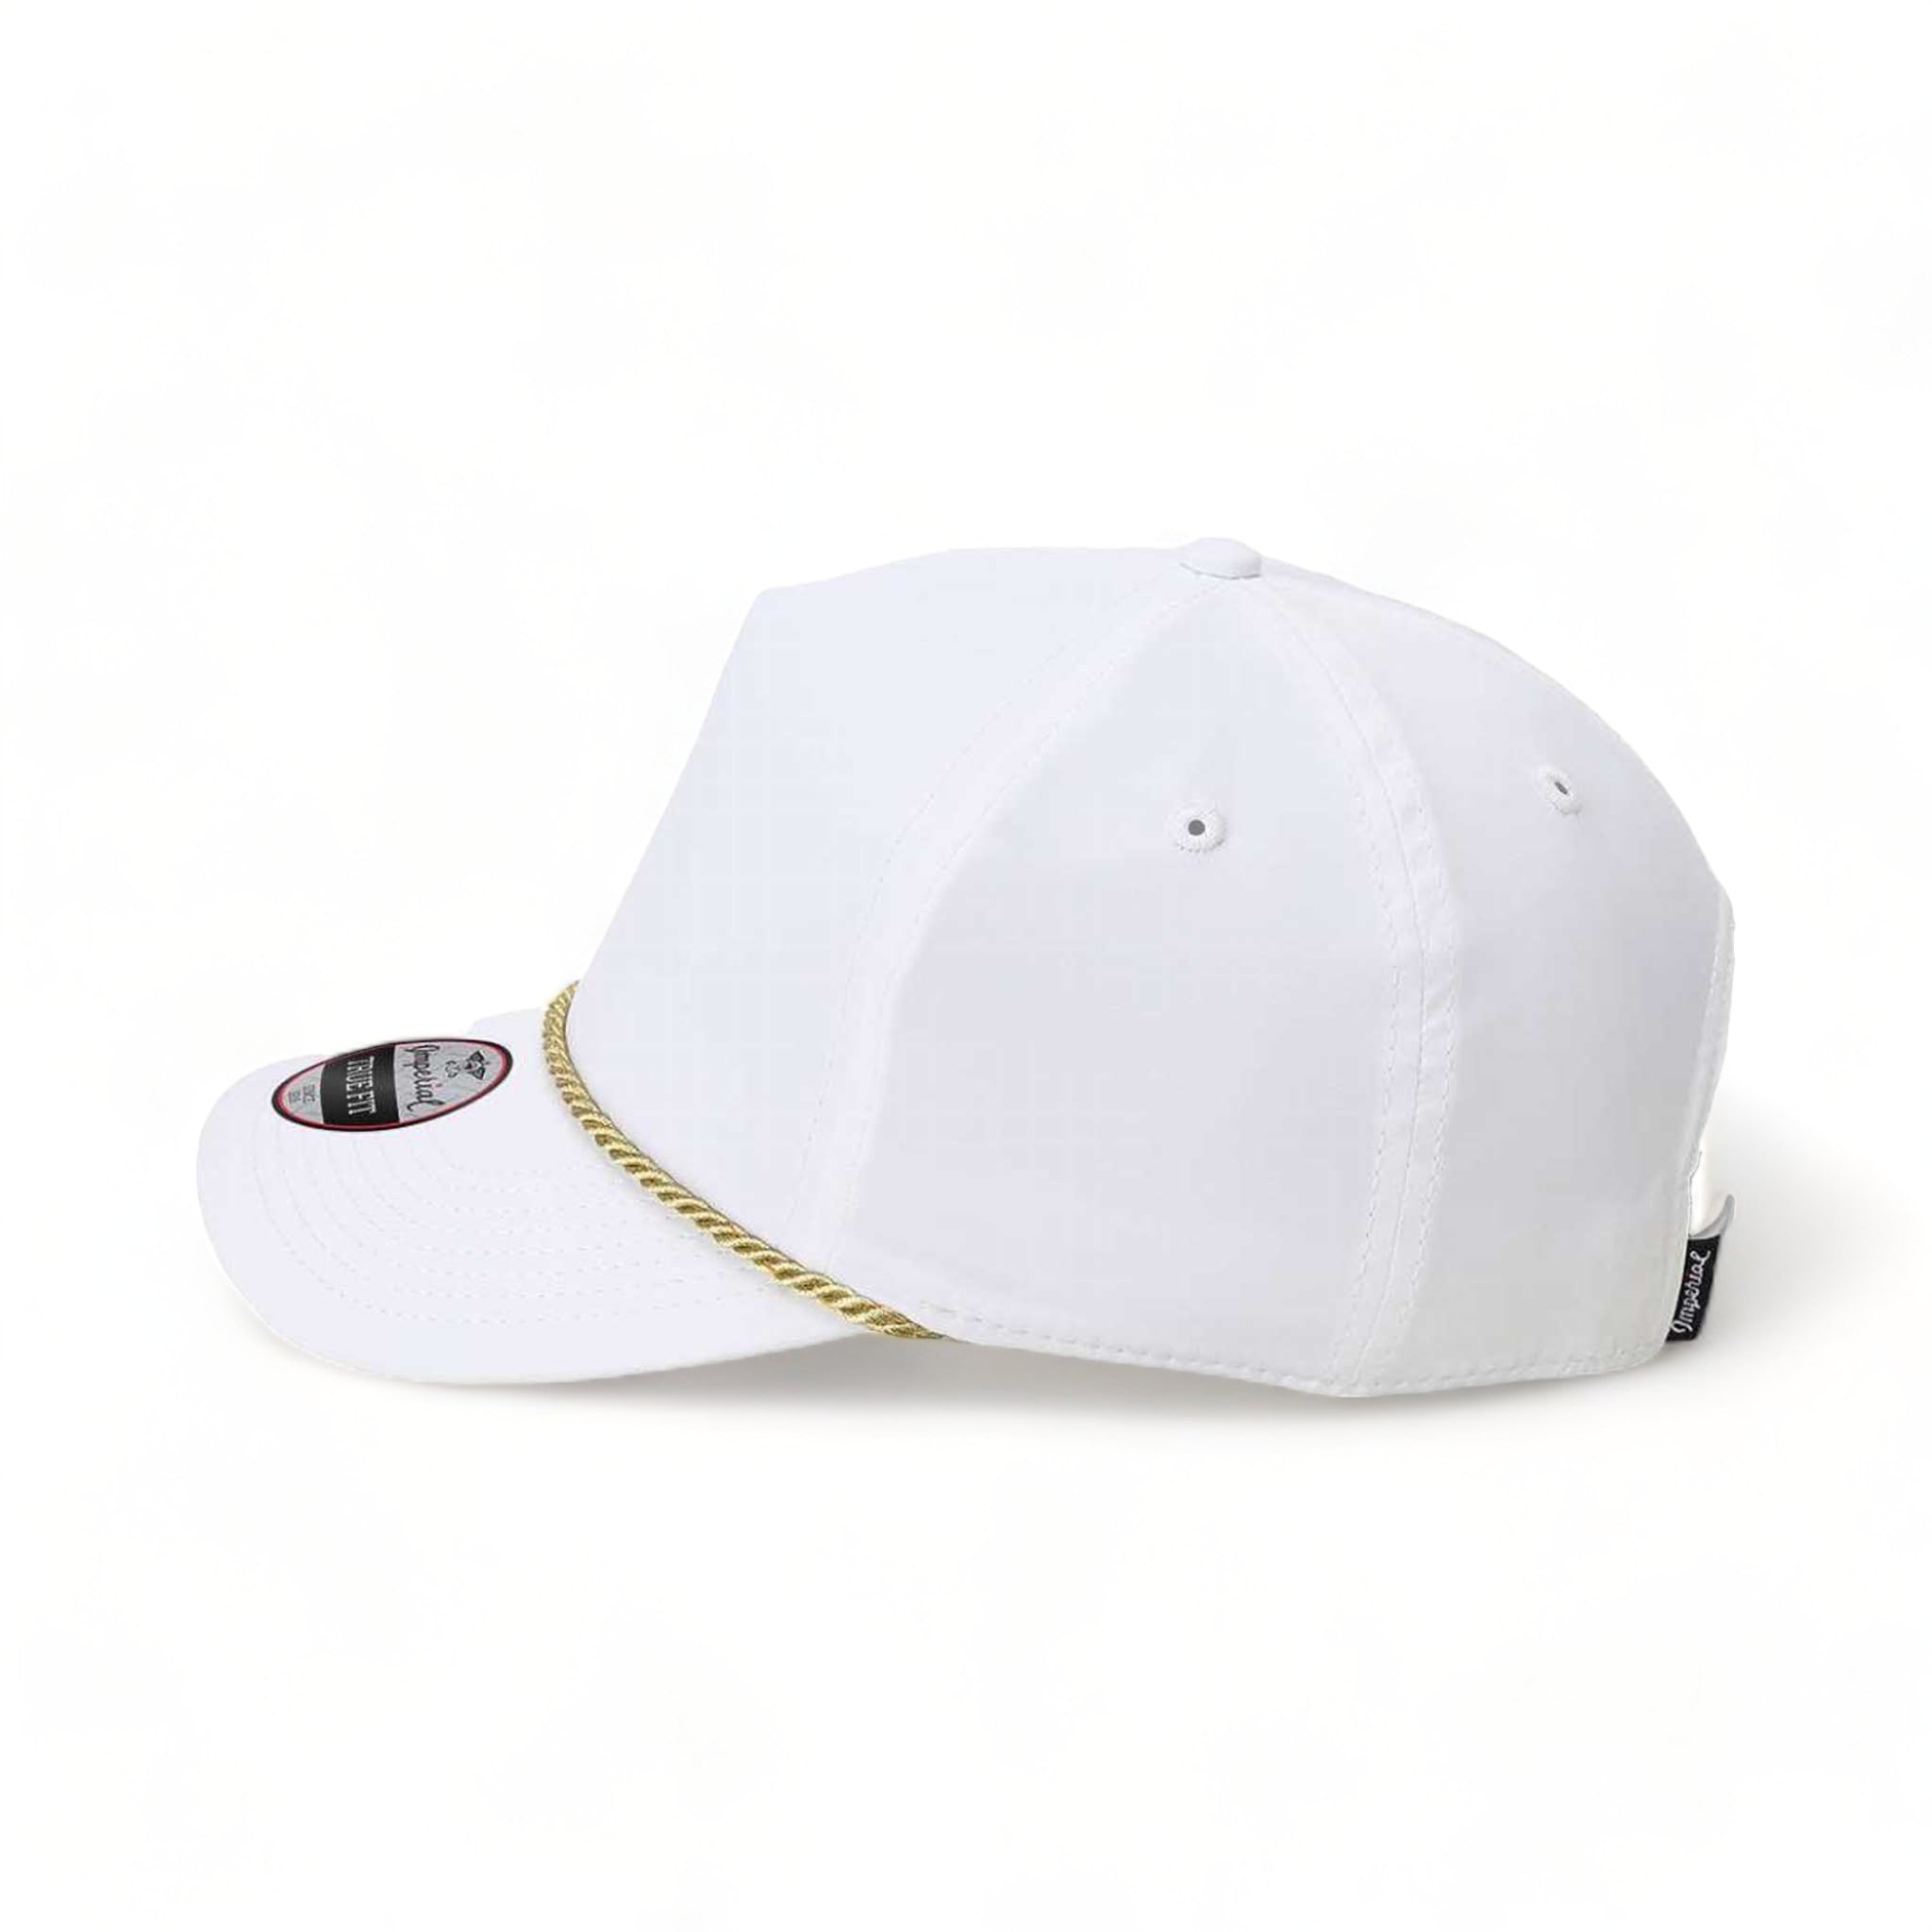 Side view of Imperial 5054 custom hat in white and metallic gold